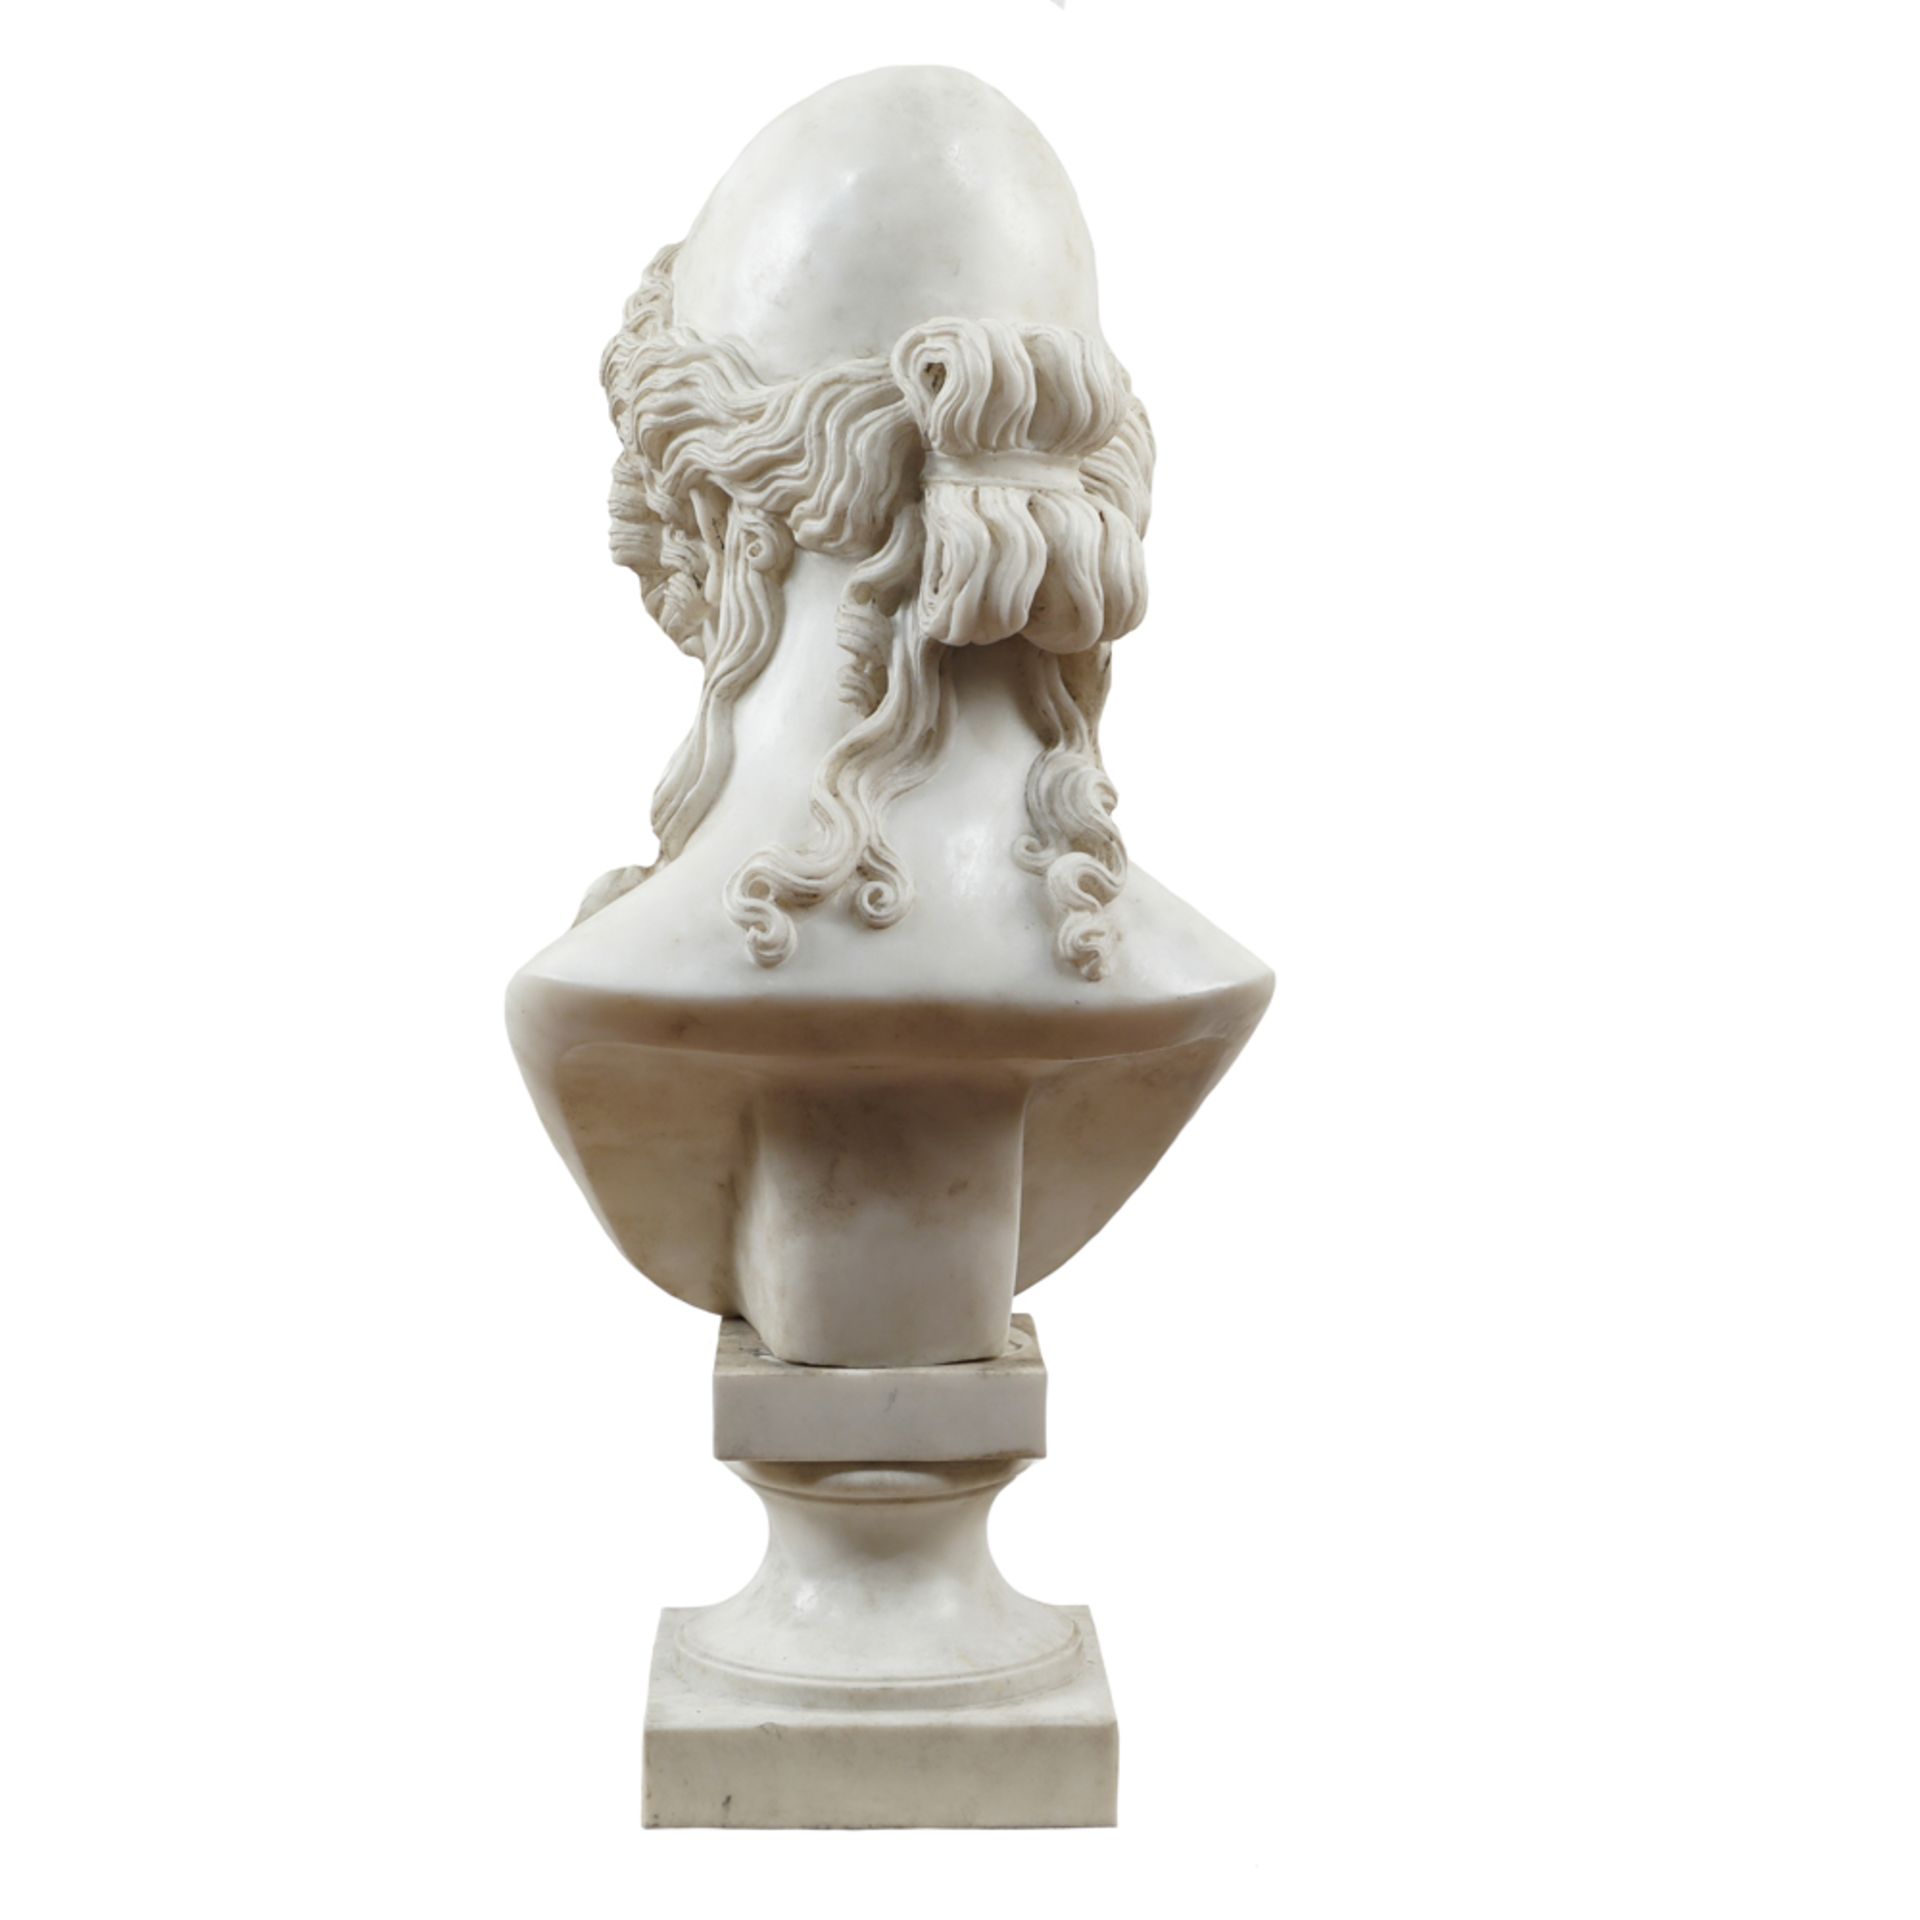 White marble sculpture 20th century 81x37x30 cm. - Image 3 of 3